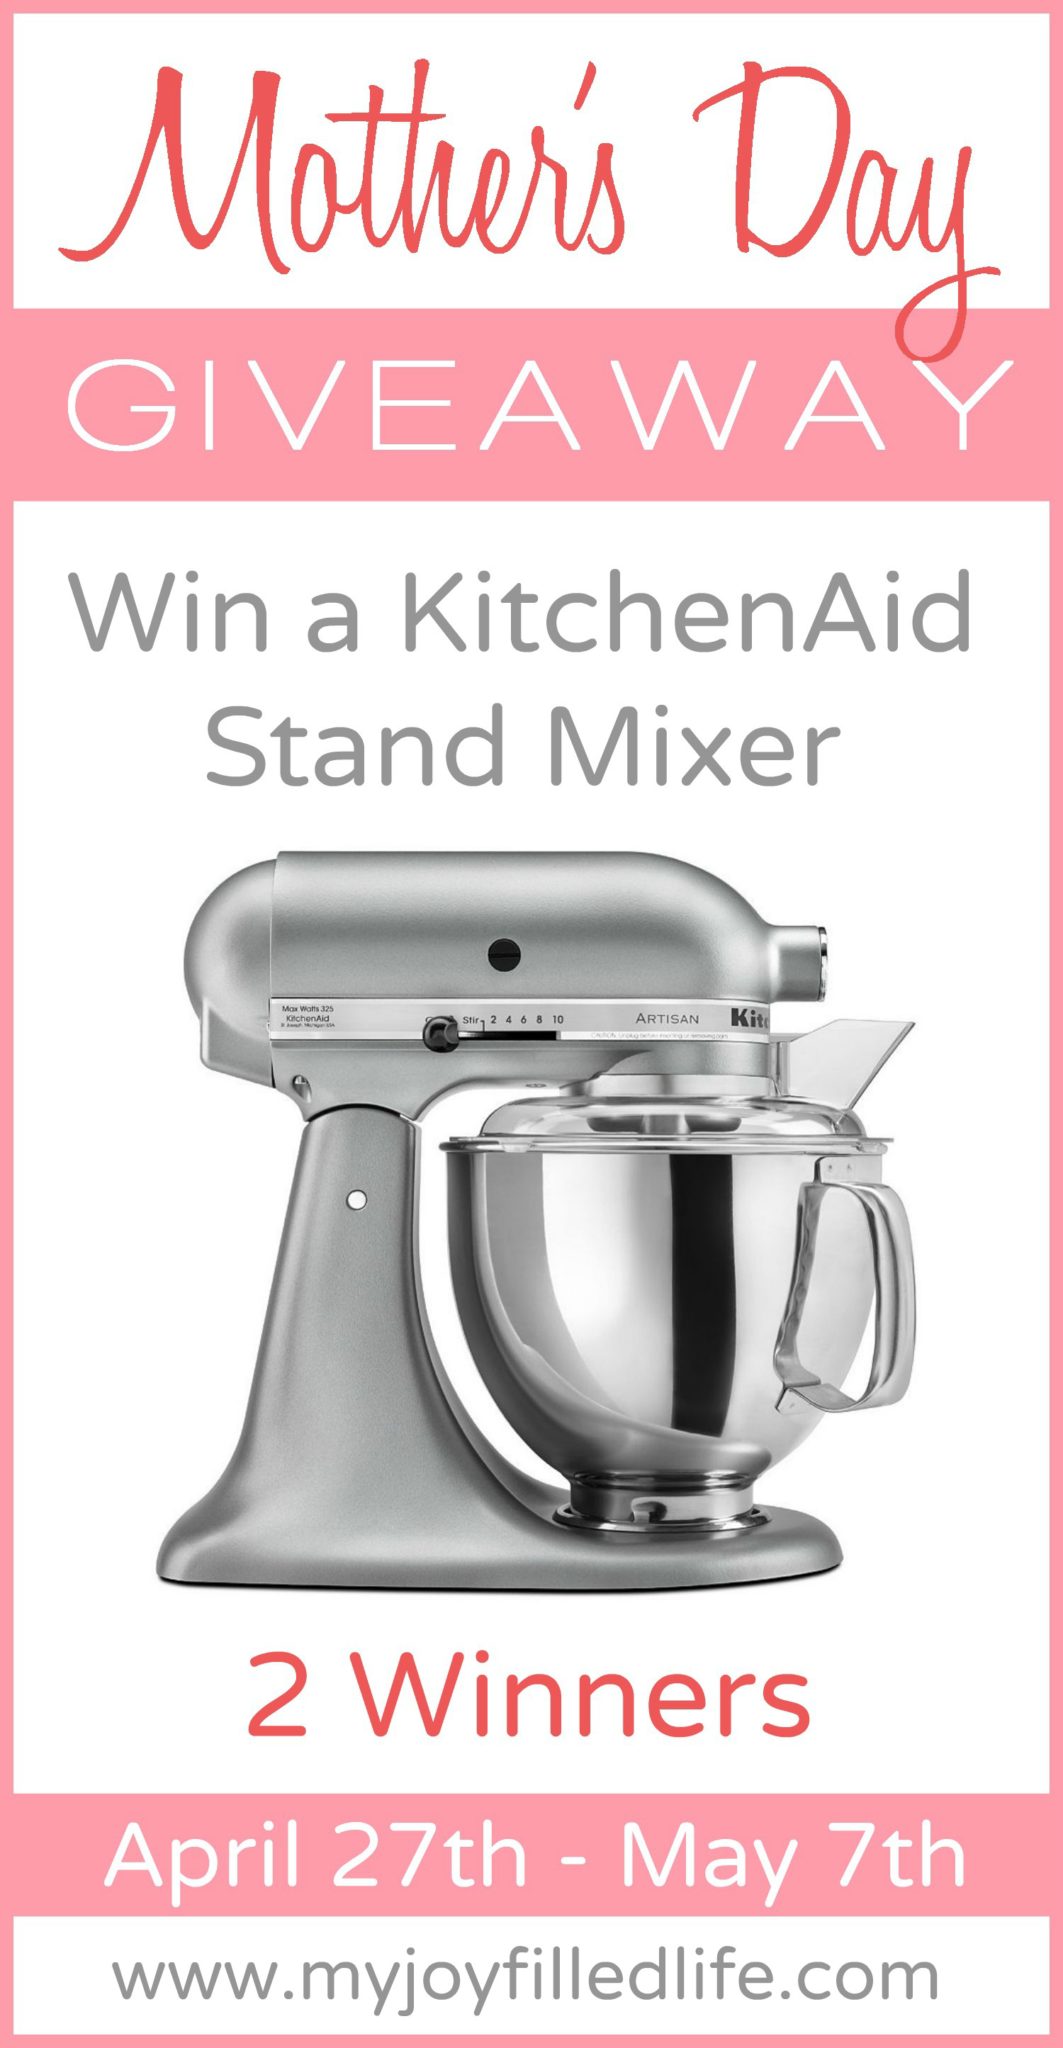 Mother's Day Giveaway - Win a KitchenAid Stand Mixer